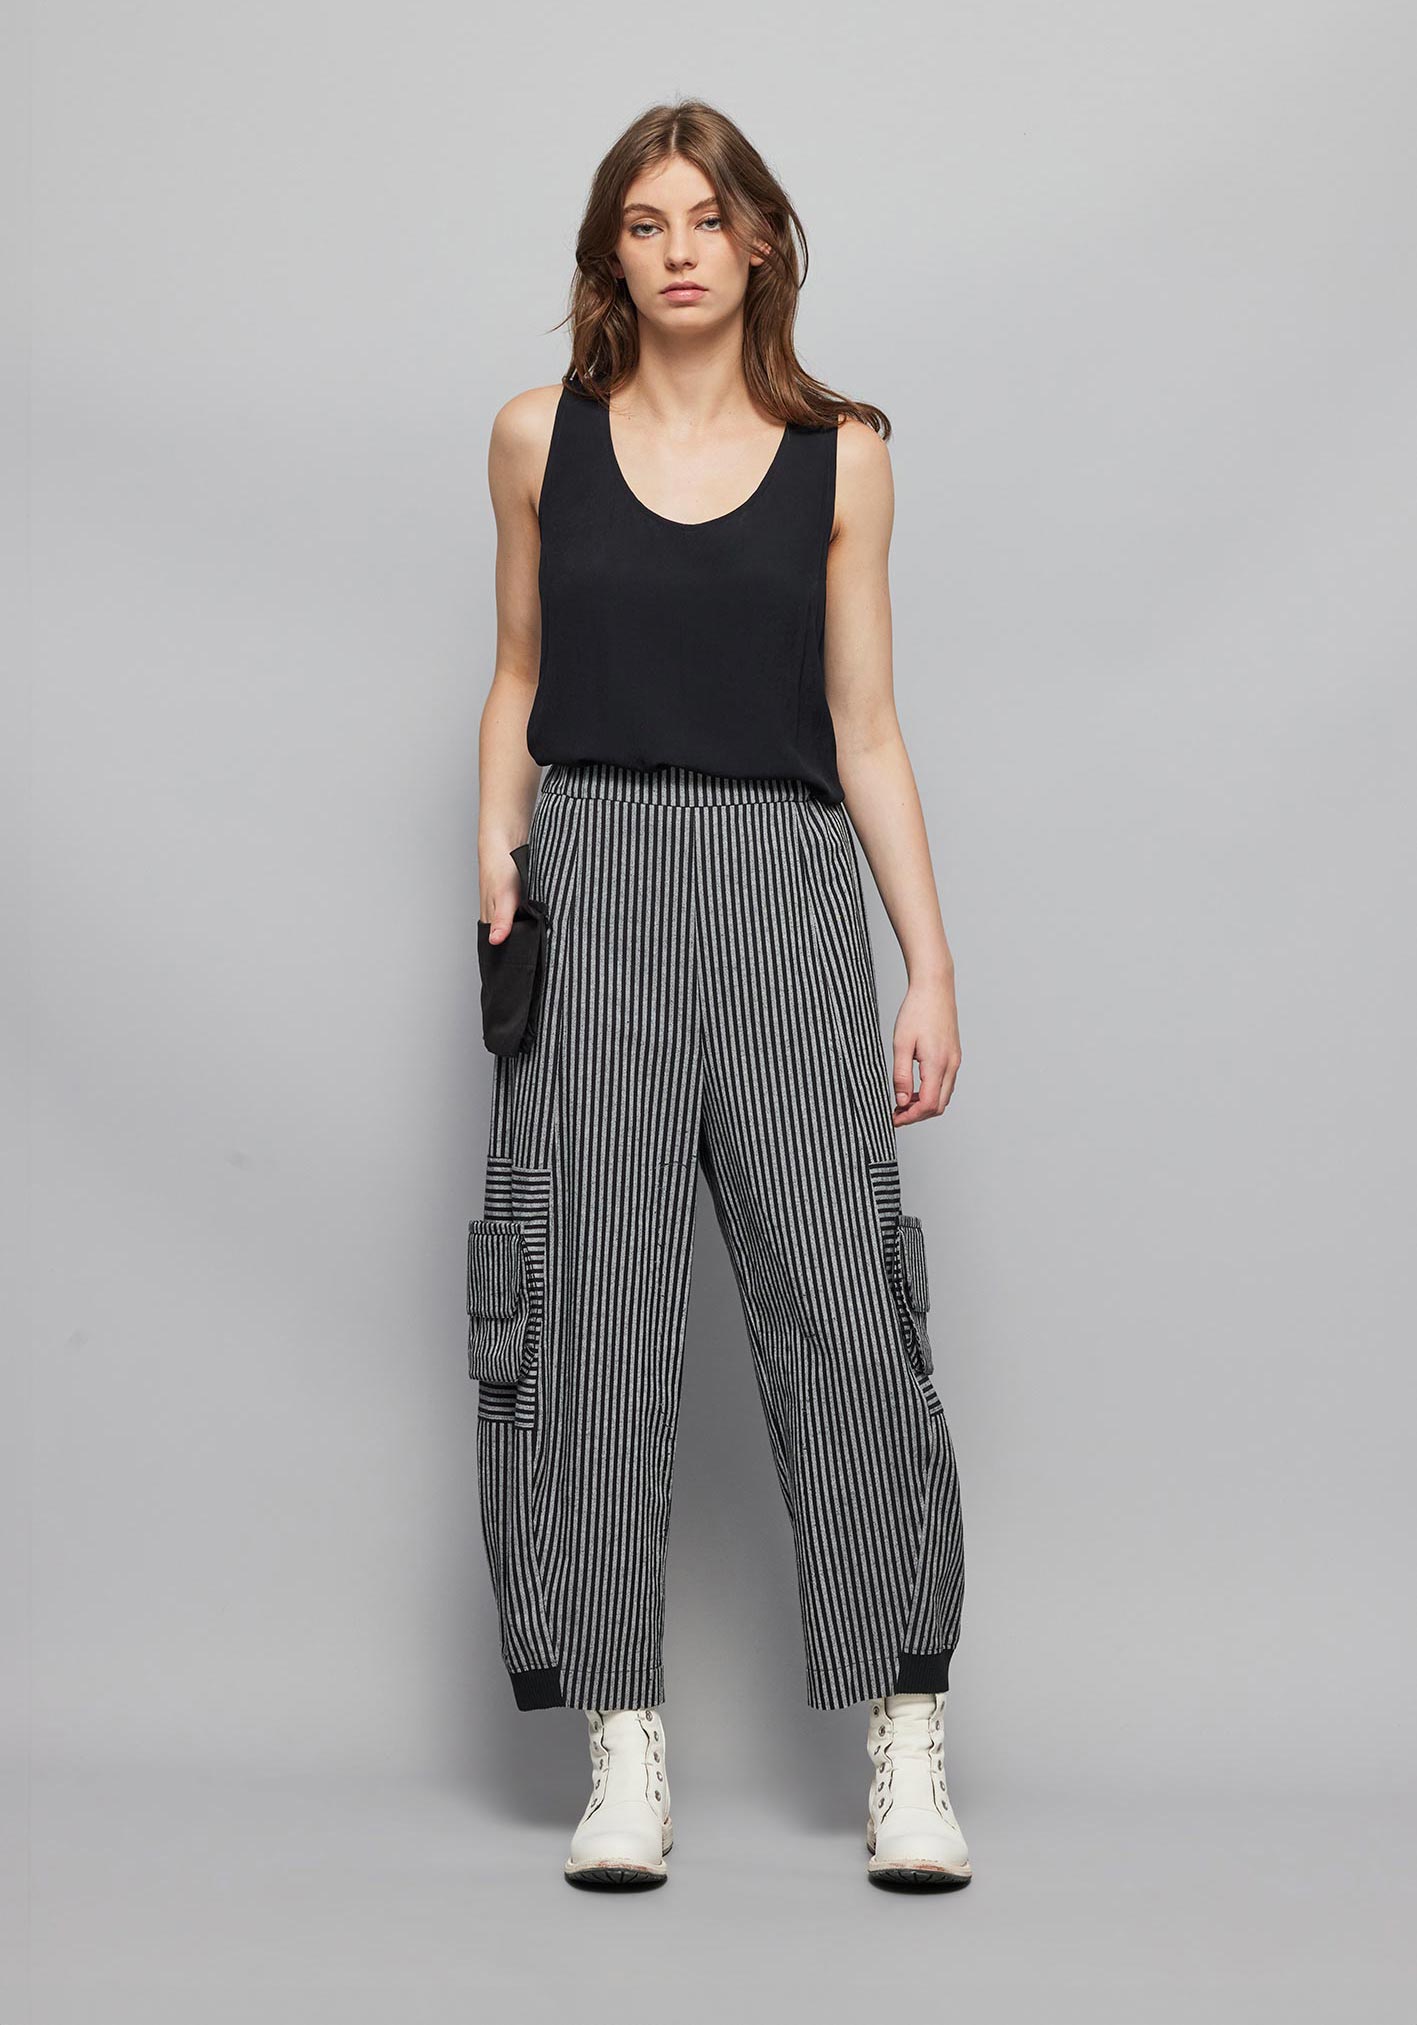 buy the latest Arch 3-D Pocket Pant online